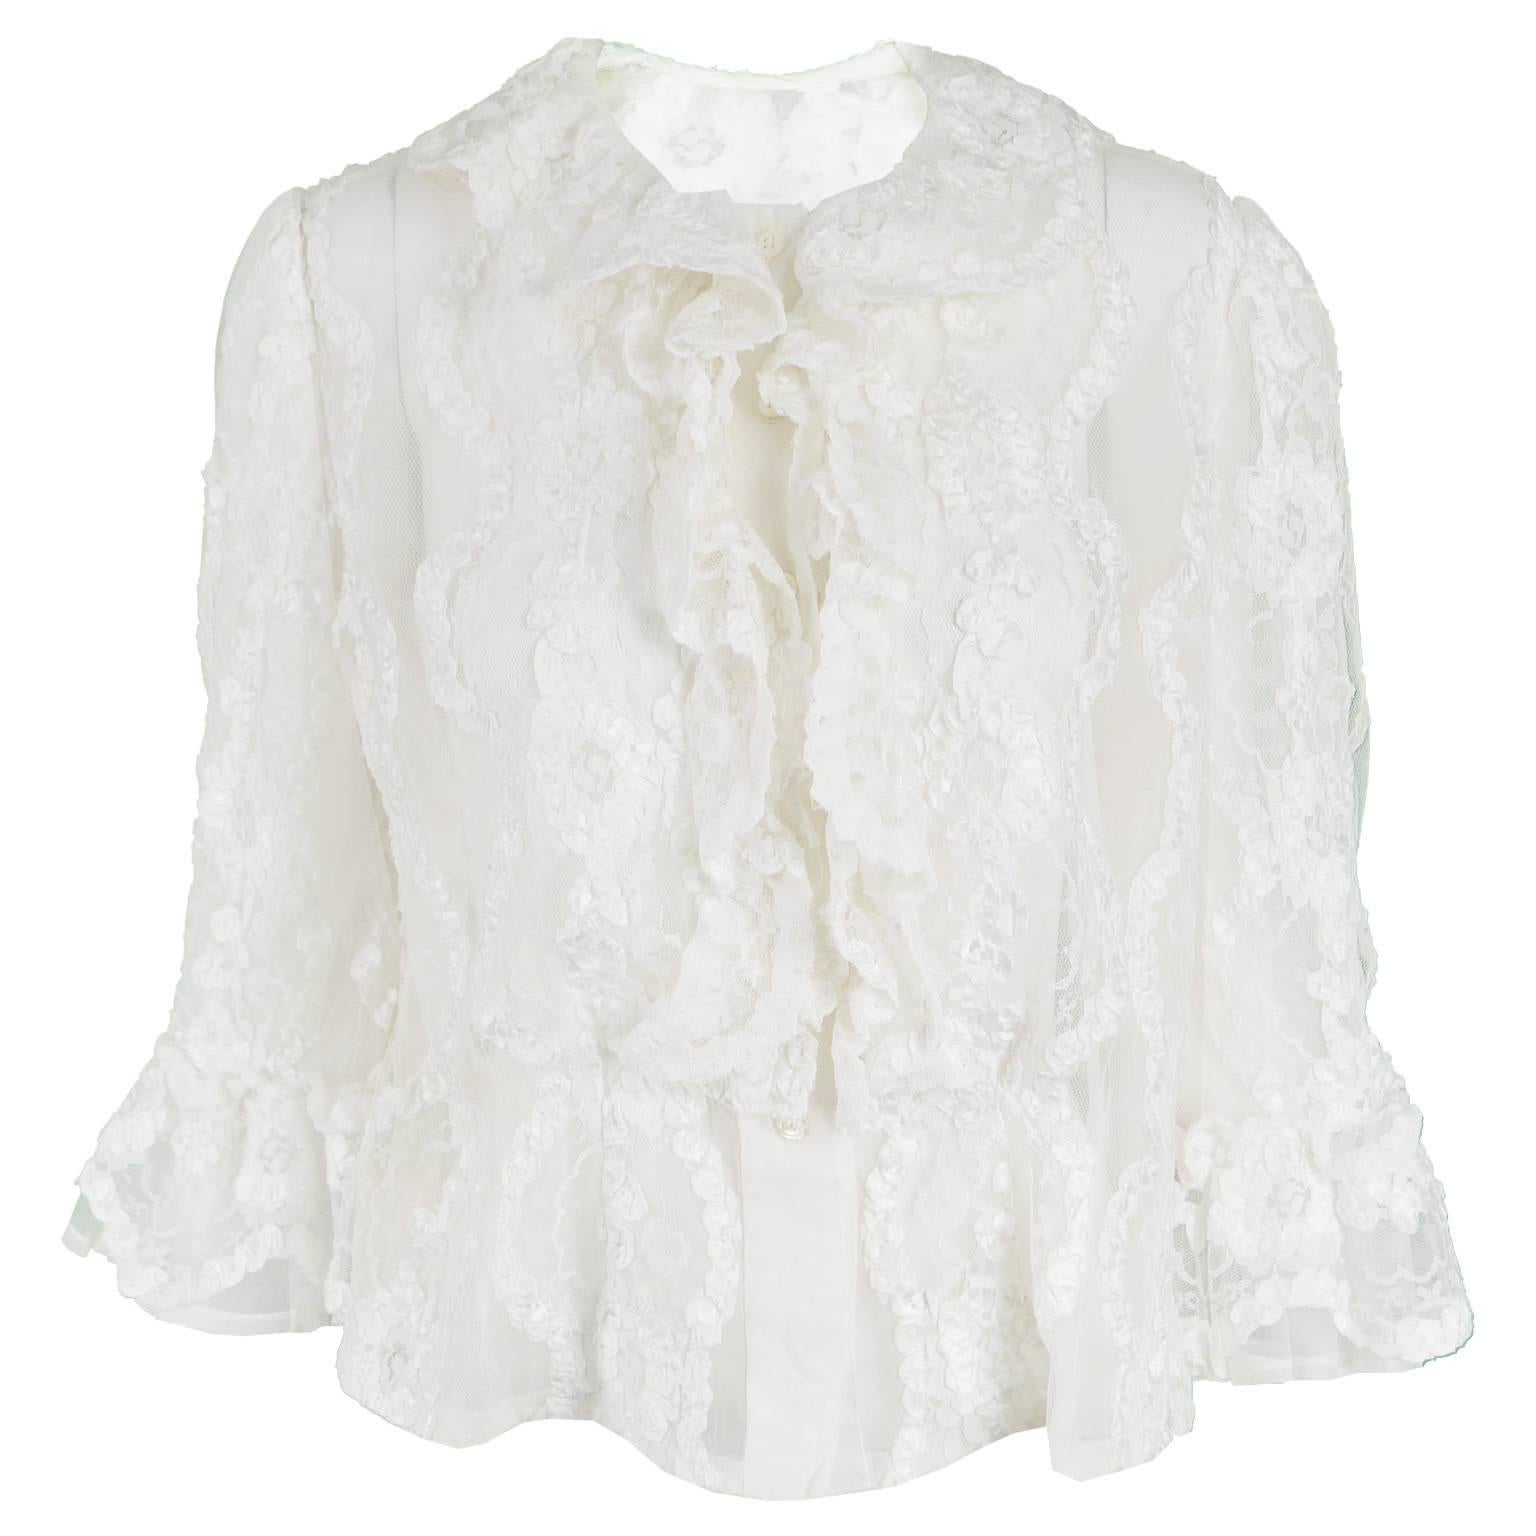 Hardy Amies Couture Vintage White Chantilly Lace Ribbonwork Ruffle Shirt, 1970s For Sale